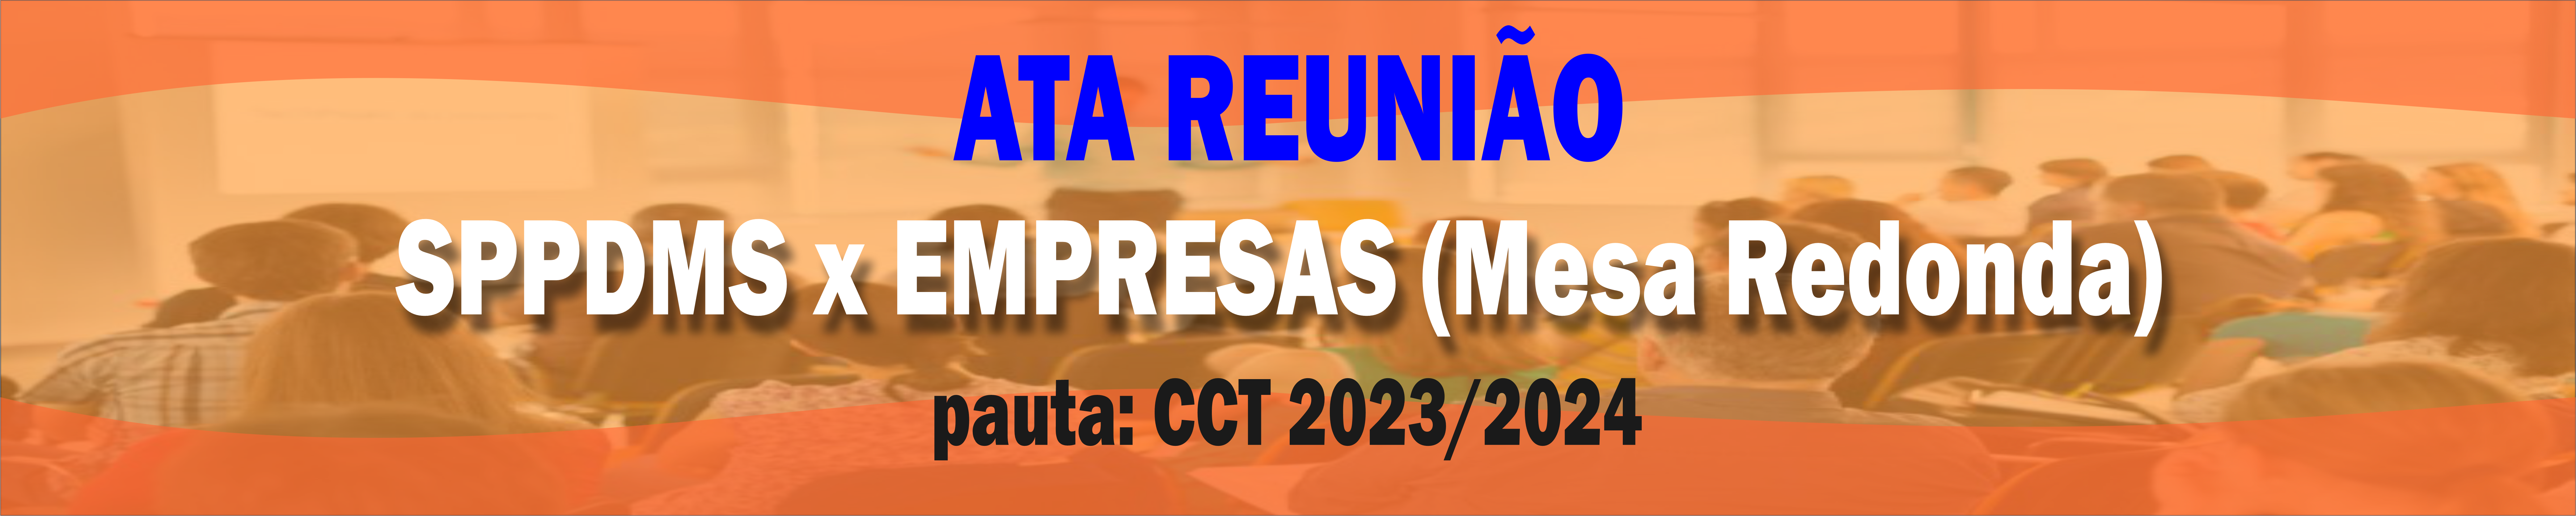 http://sppdms.org.br/wp-content/uploads/2023/05/Ata-Reuniao-2023-2024.png